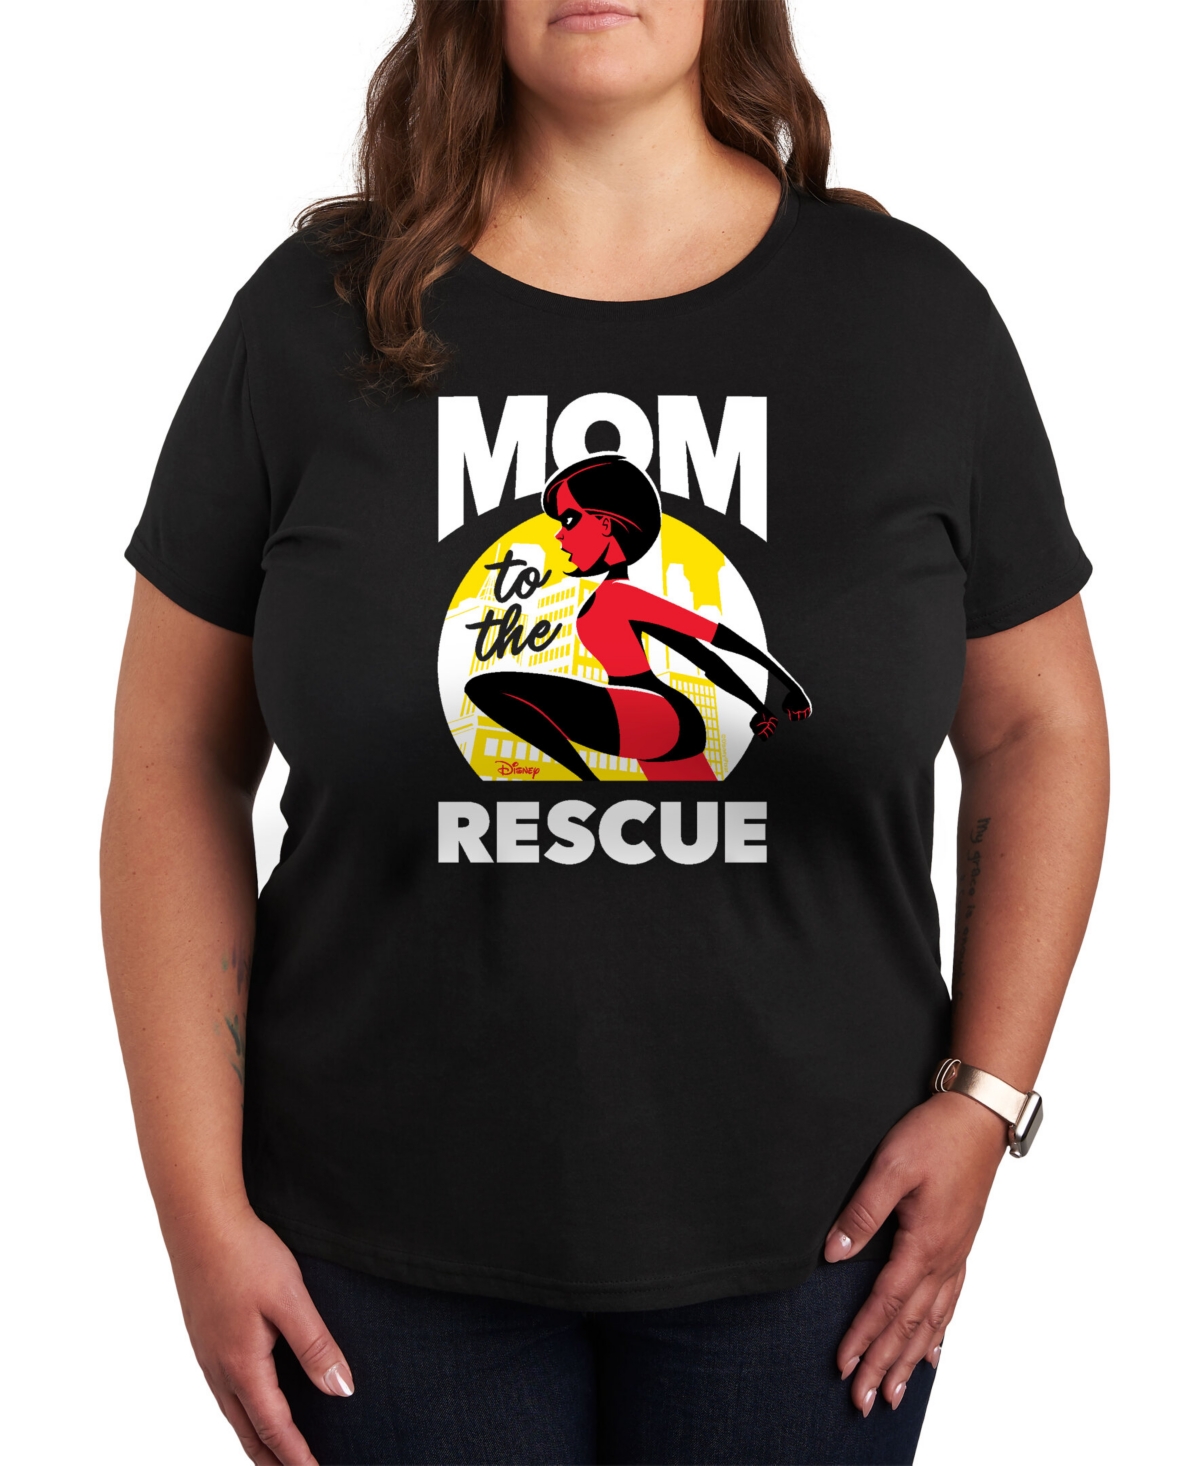 Hybrid Apparel Women's Trendy Plus Size The Incredibles Super Mom Graphic T-shirt In Black